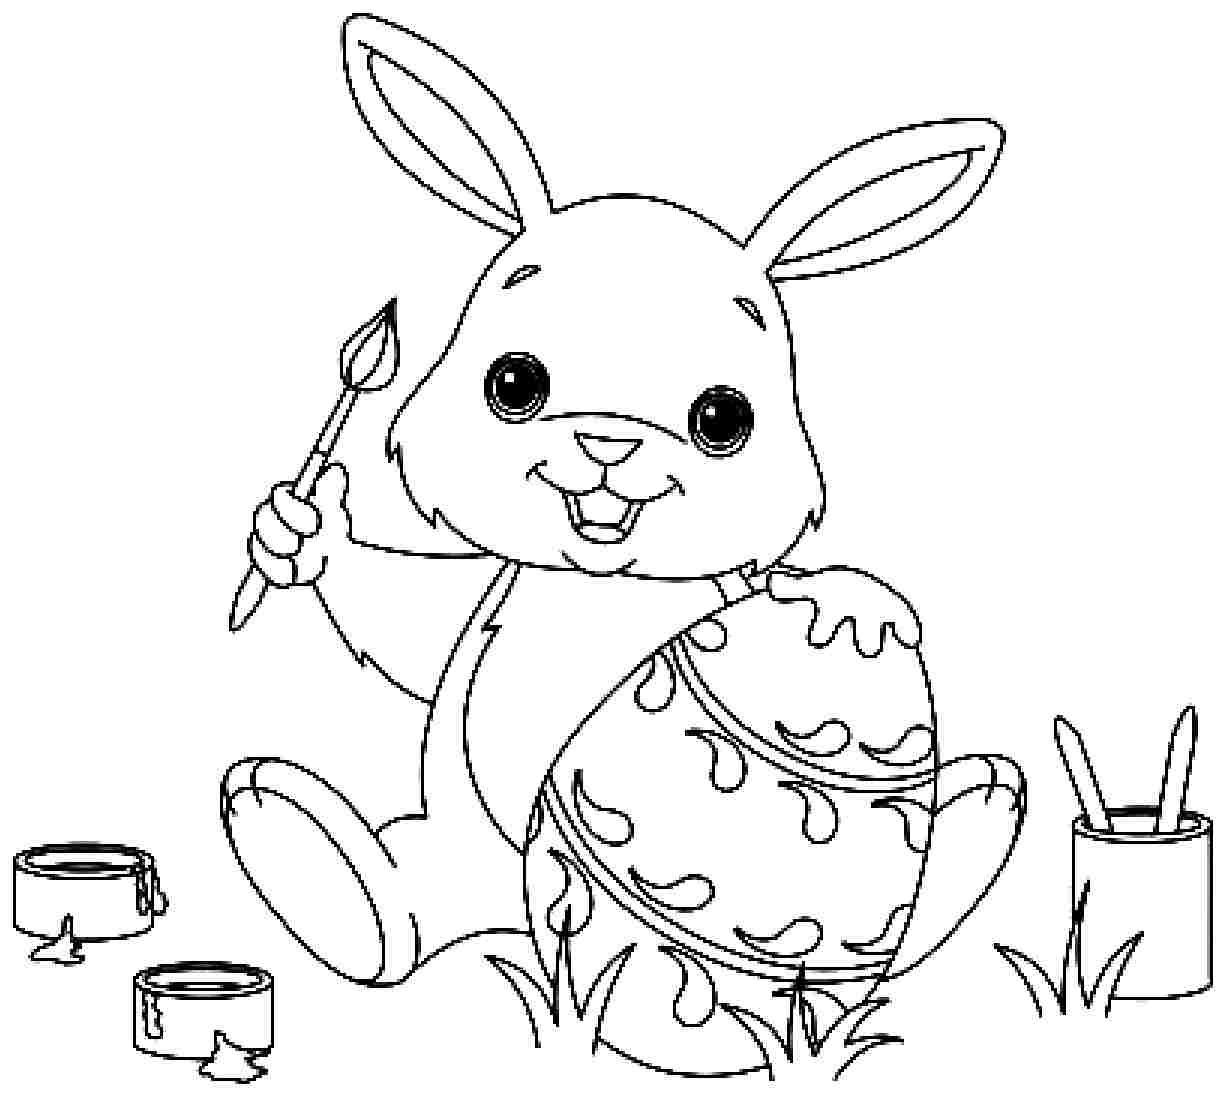 Bunny Coloring Pages For Adults At Getcolorings.com | Free Printable